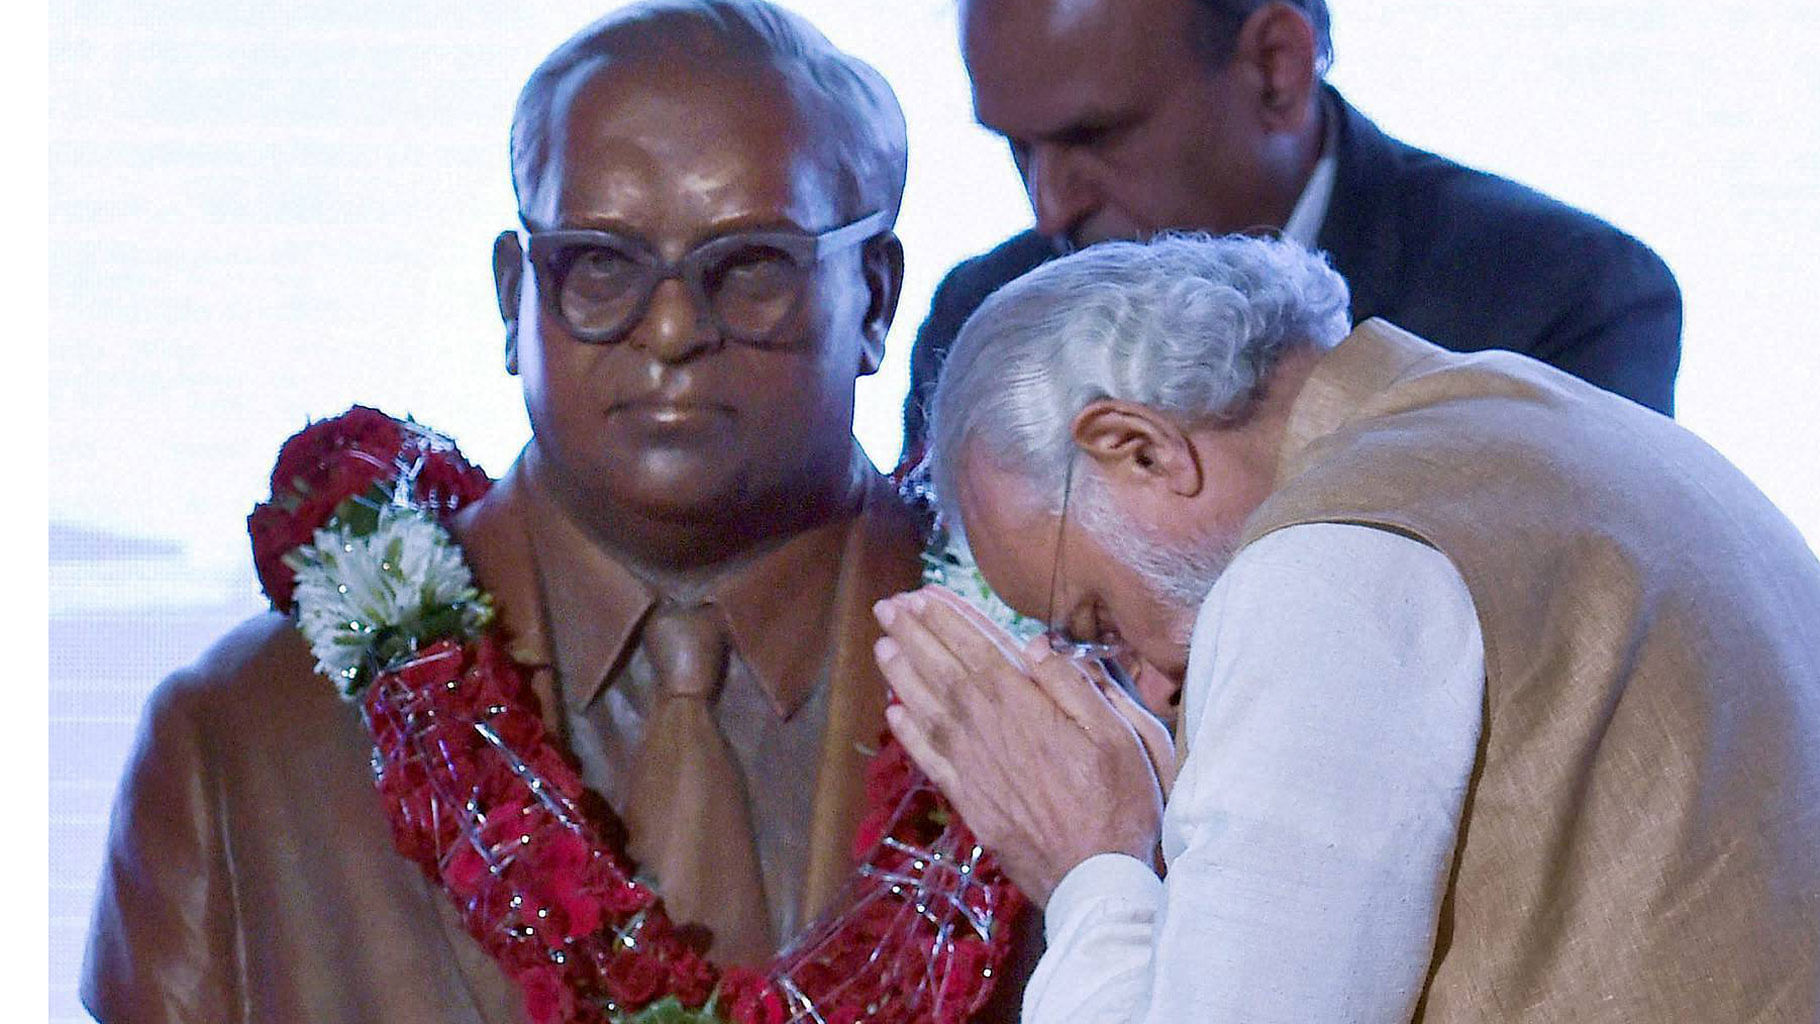 Prime Minister Narendra Modi pays tribute to the bust of Babasaheb Ambedkar on the occasion of his 125th birth anniversary during the inaugural ceremony of Maritime India Summit 2016 in Mumbai. (Photo: PTI)